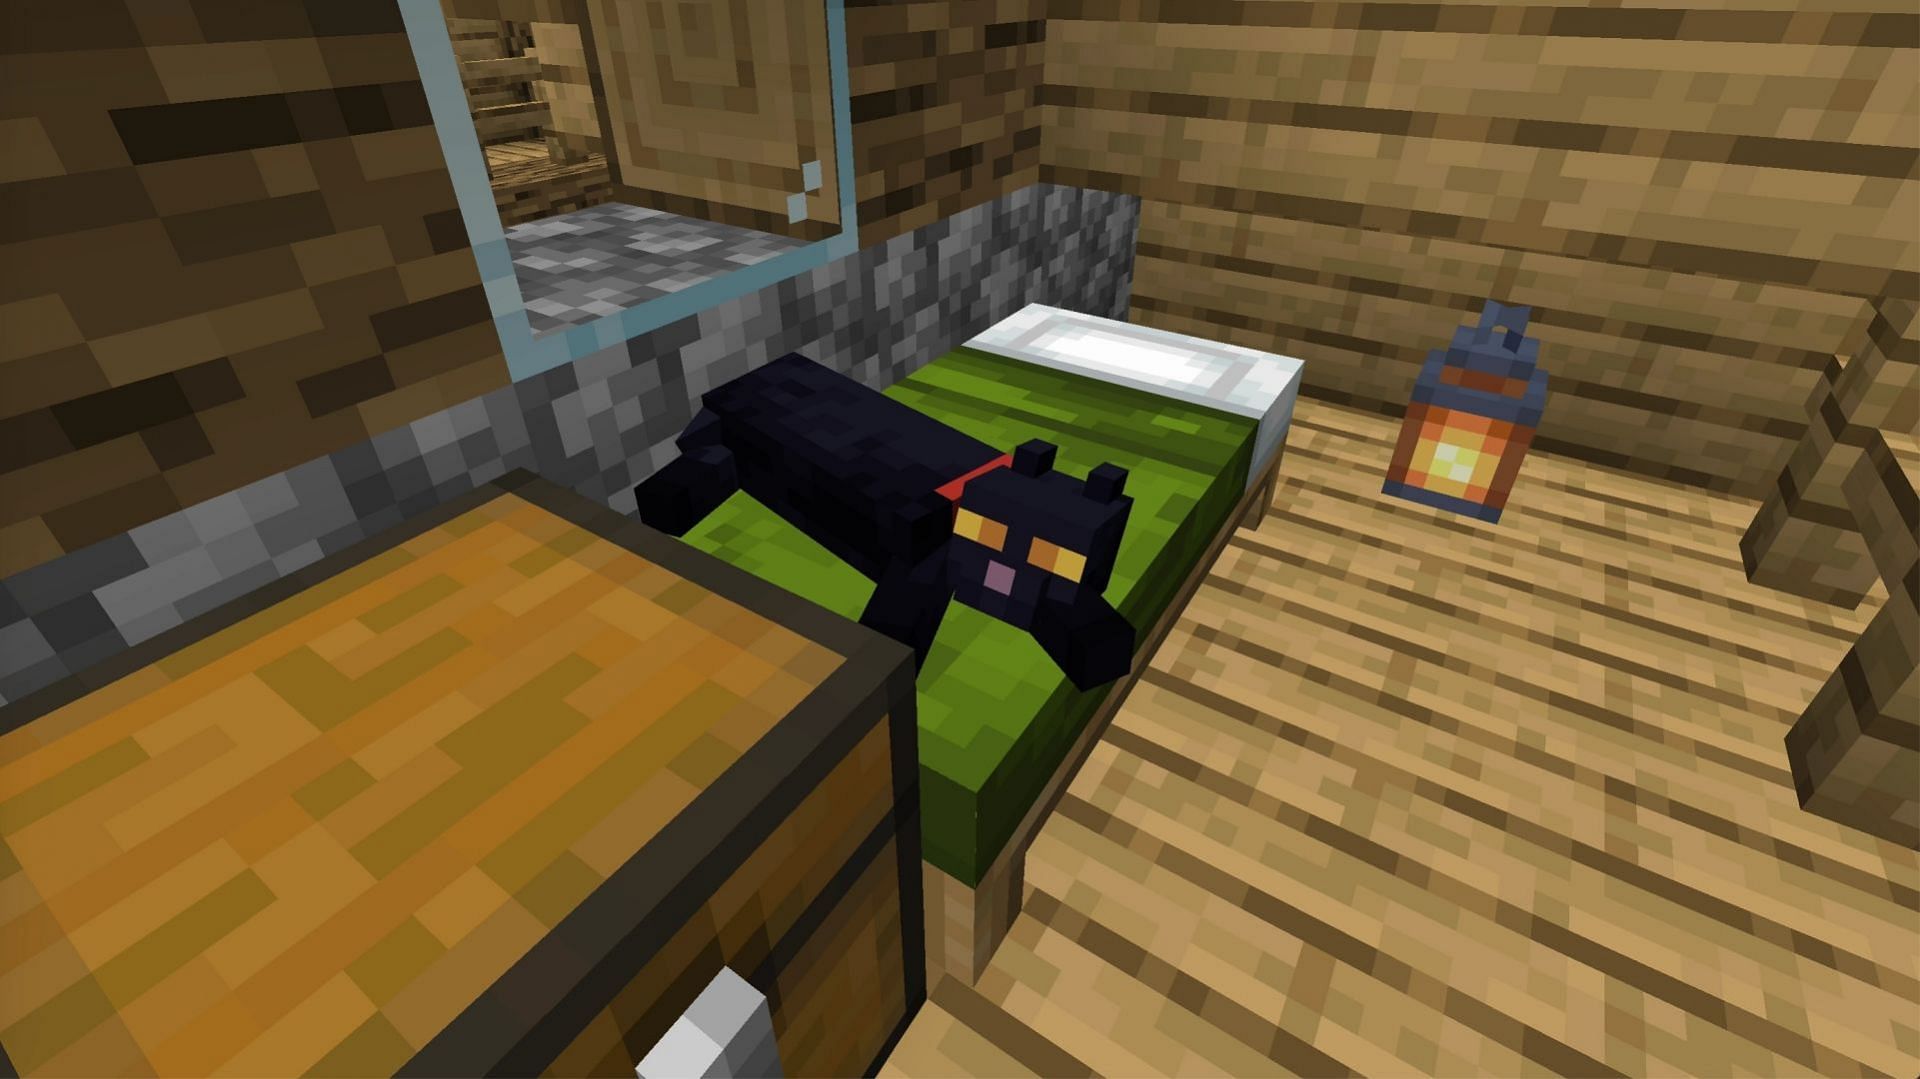 Cats can occasionally lay on beds and purr in Minecraft (Image via Mojang)